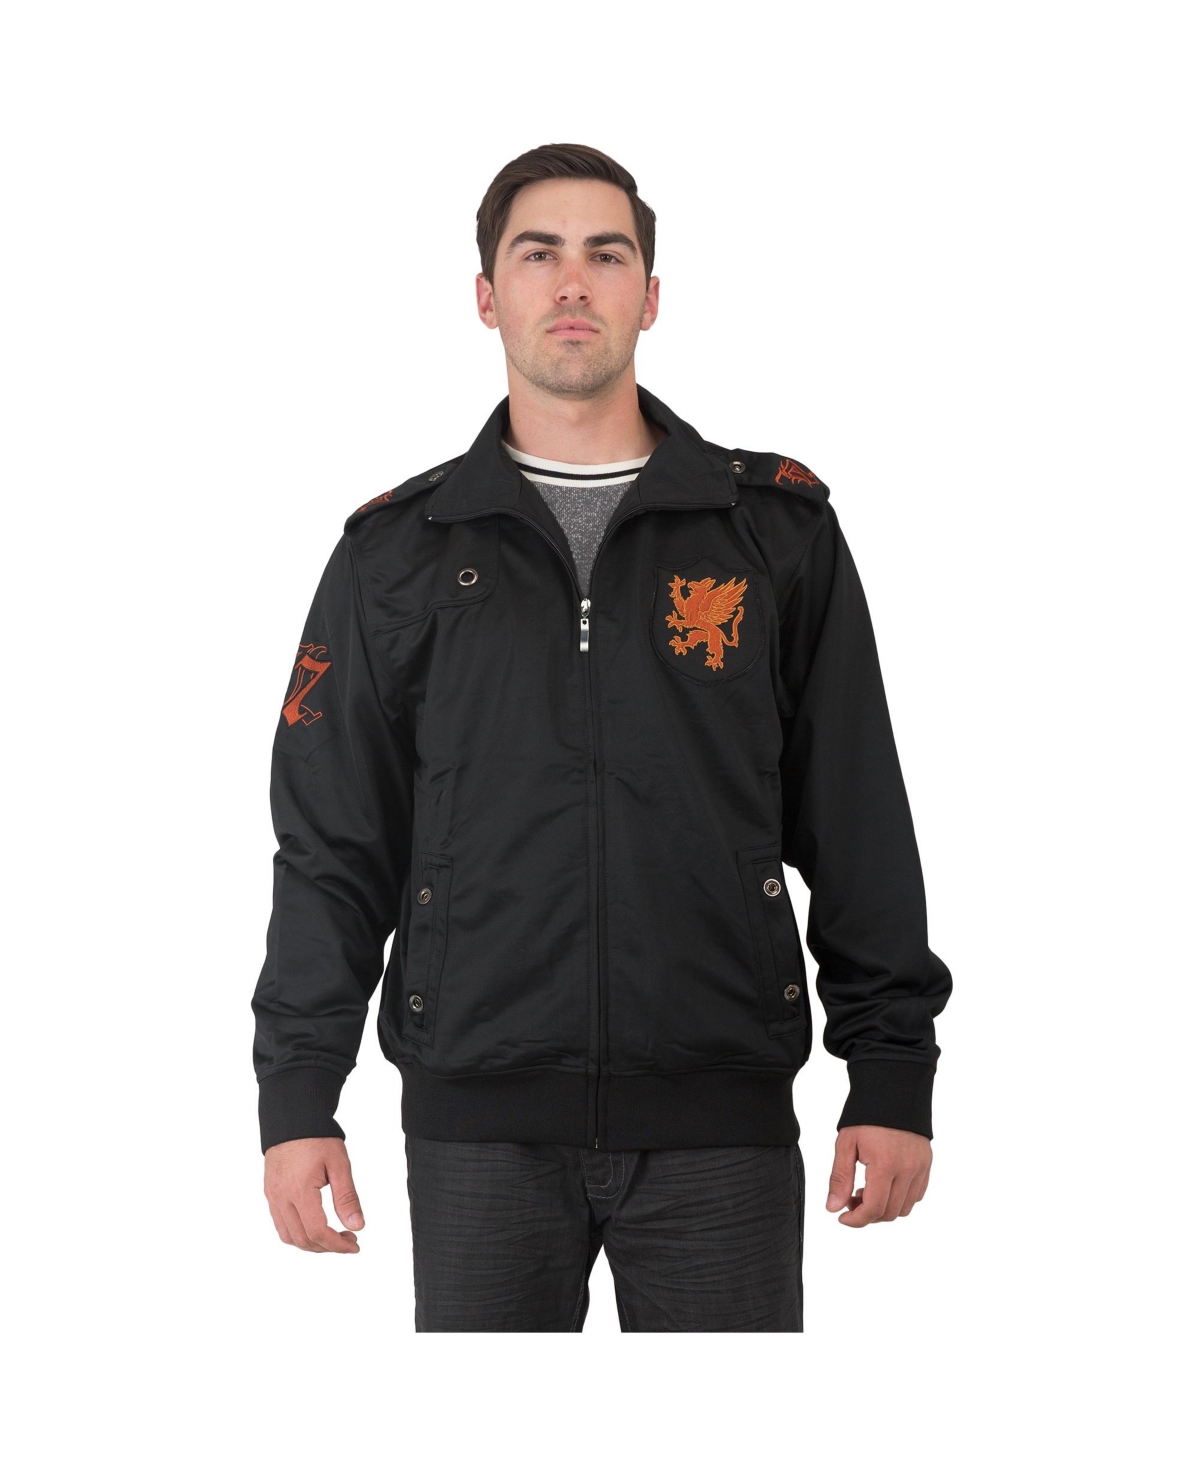 Men's Big & Tall Embroidery Patches Performance Track Jacket - Black